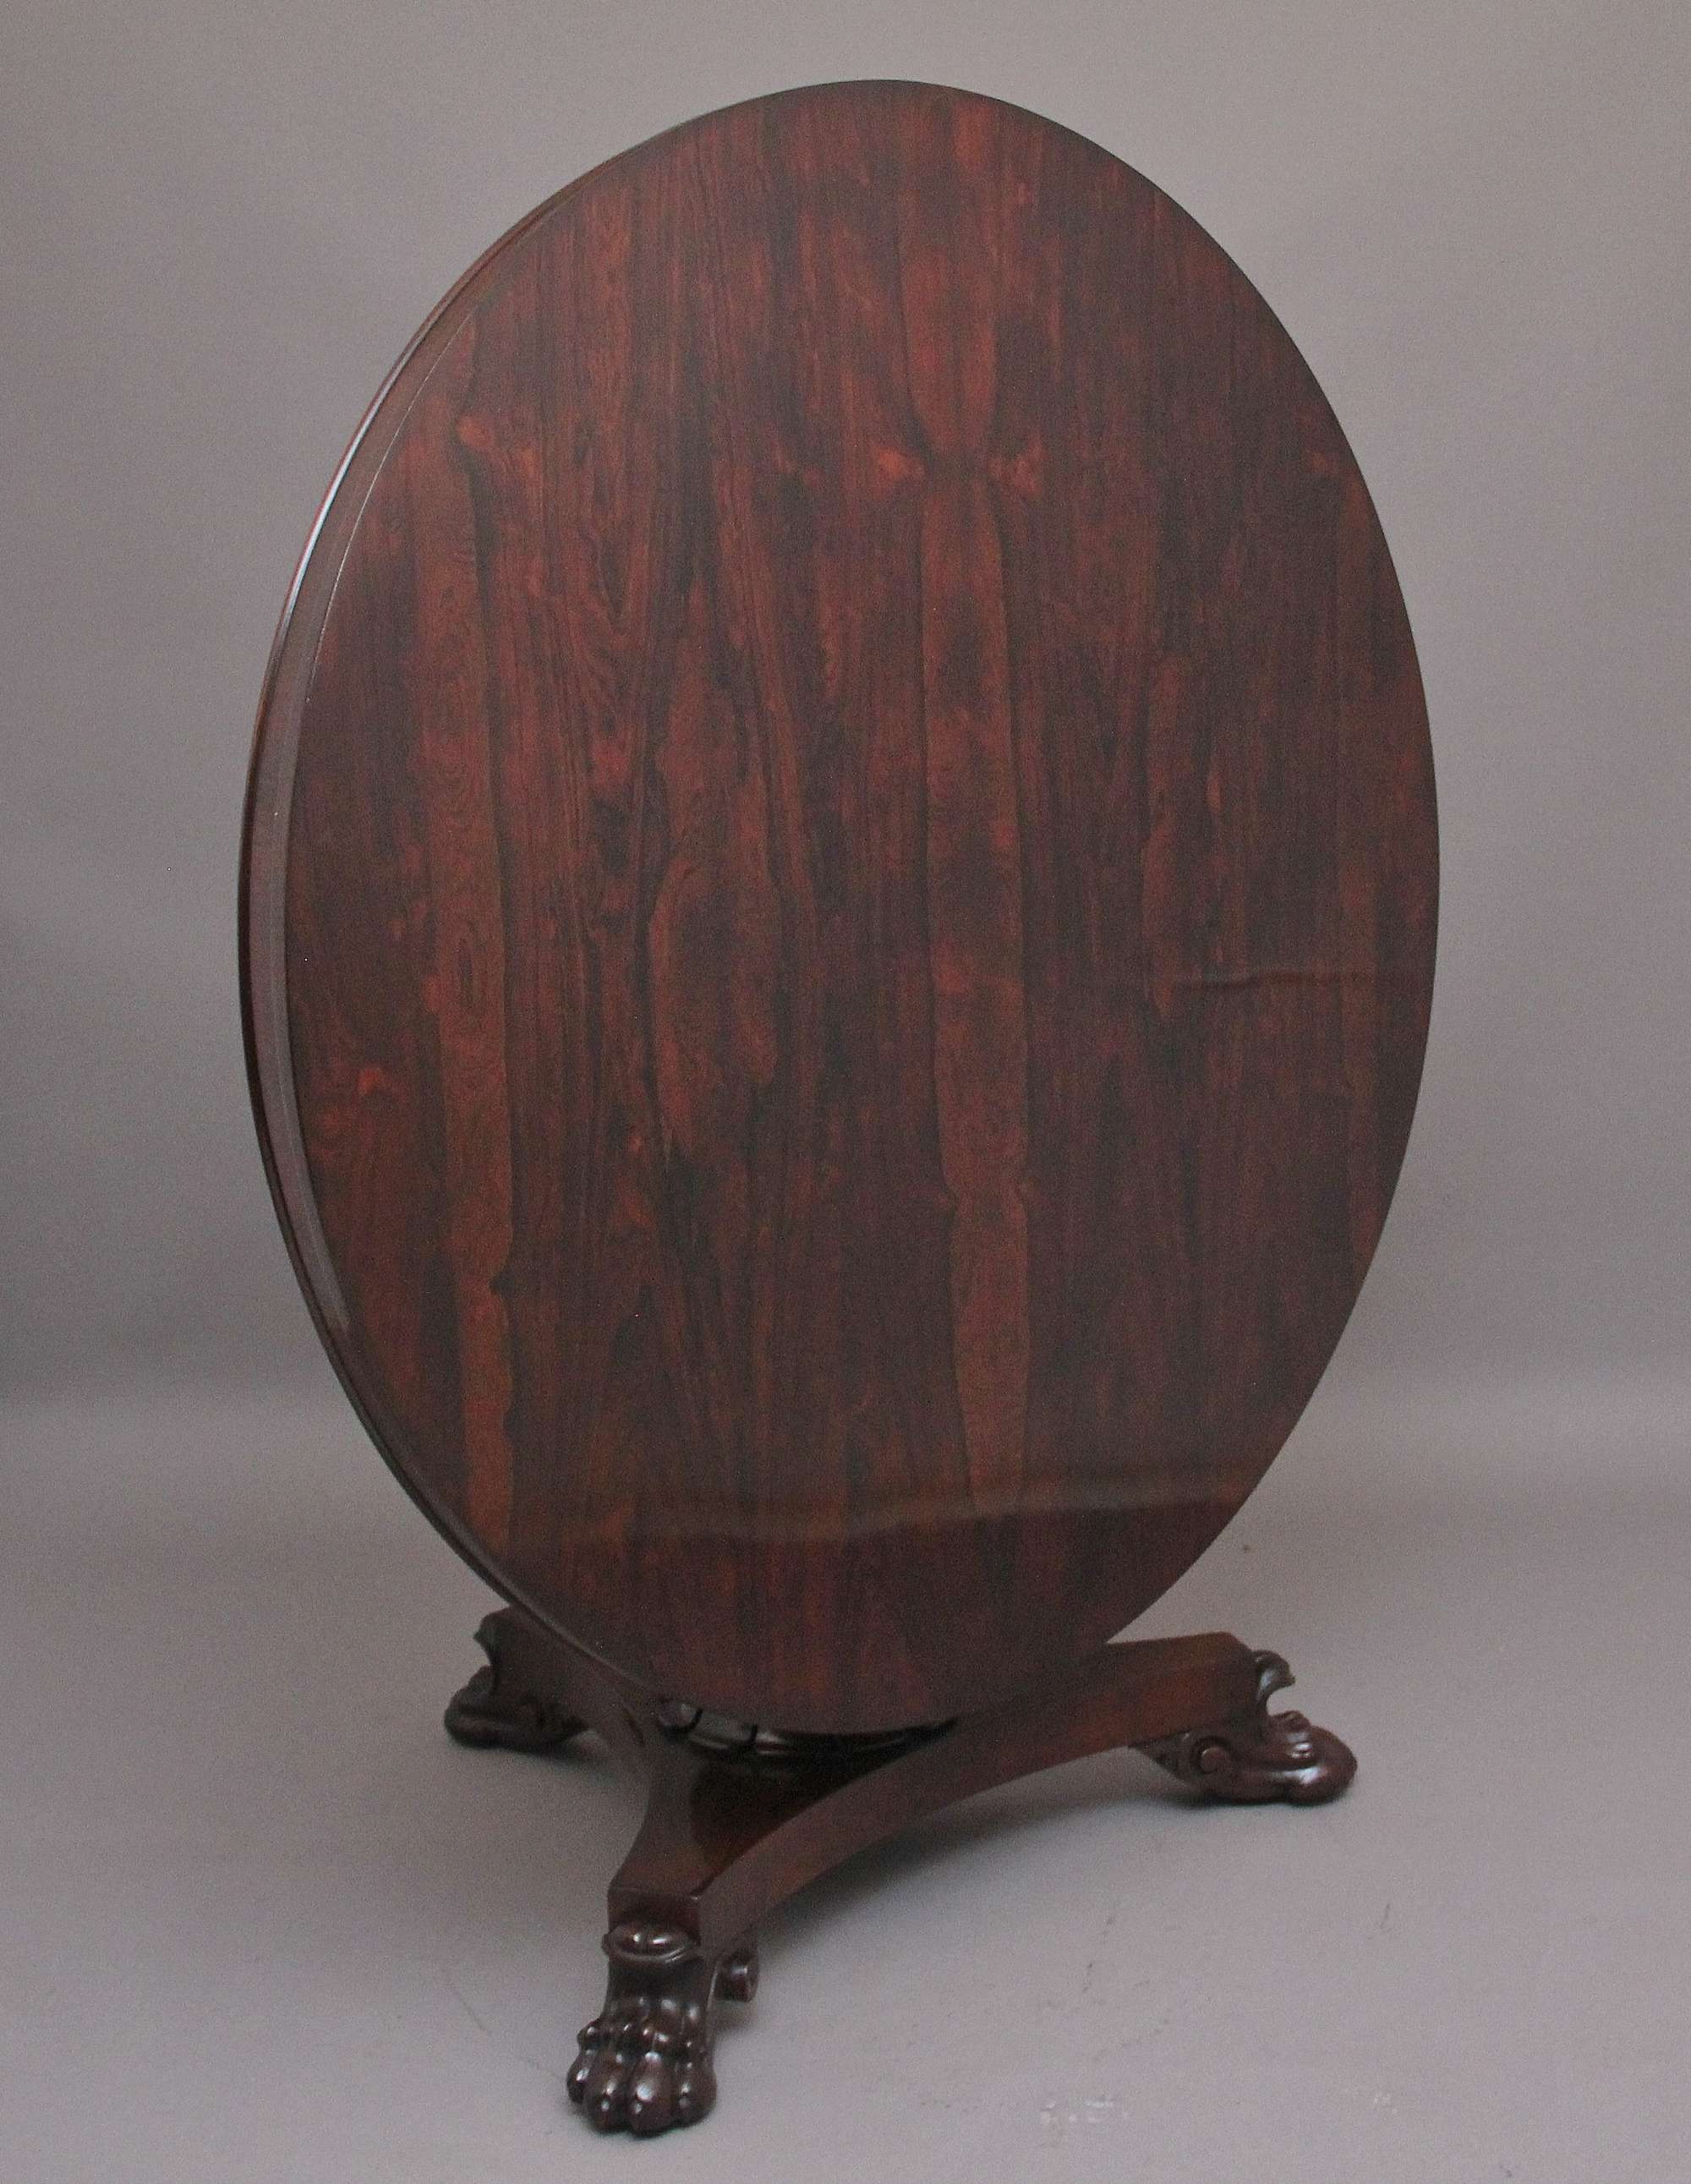 Early 19th Century Rosewood Breakfast Table